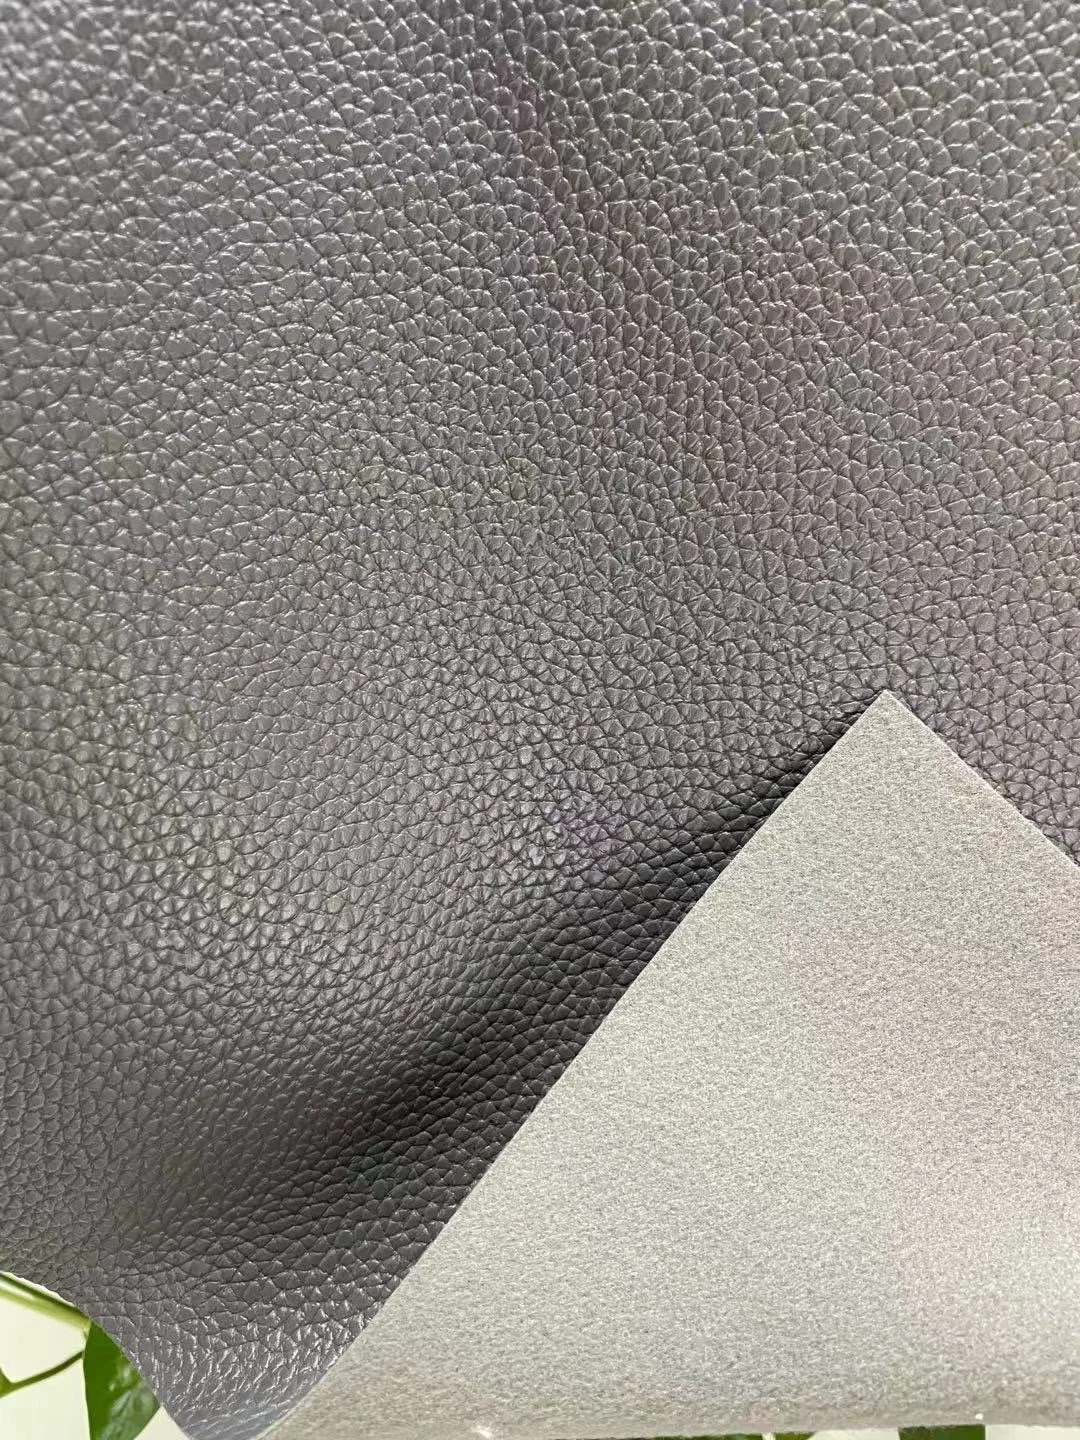 Eco Friendly Breathable Durable1.2mm Printable PVC Leather for Furniture, Bags